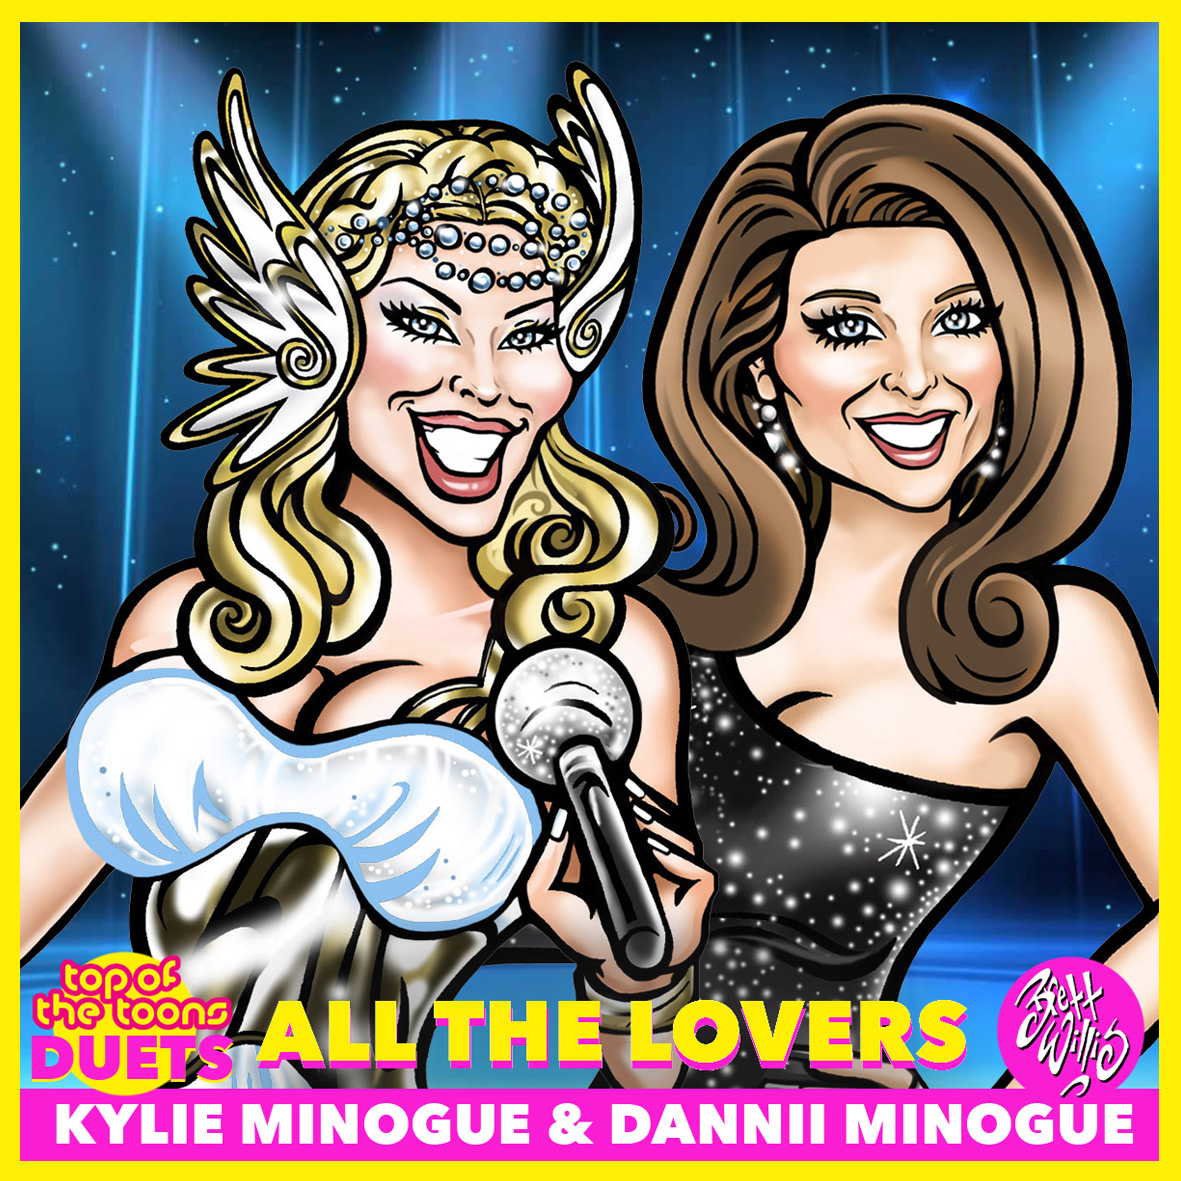 TOP of the TOONS
DUETS
Kylie Minogue & Dannii Minogue
'All The Lovers'
Performed: February 2023
Sydney WorldPride Opening Concert
#mighty #minogue #music #monday #HappyBirthday #kylie #danni #toonarama